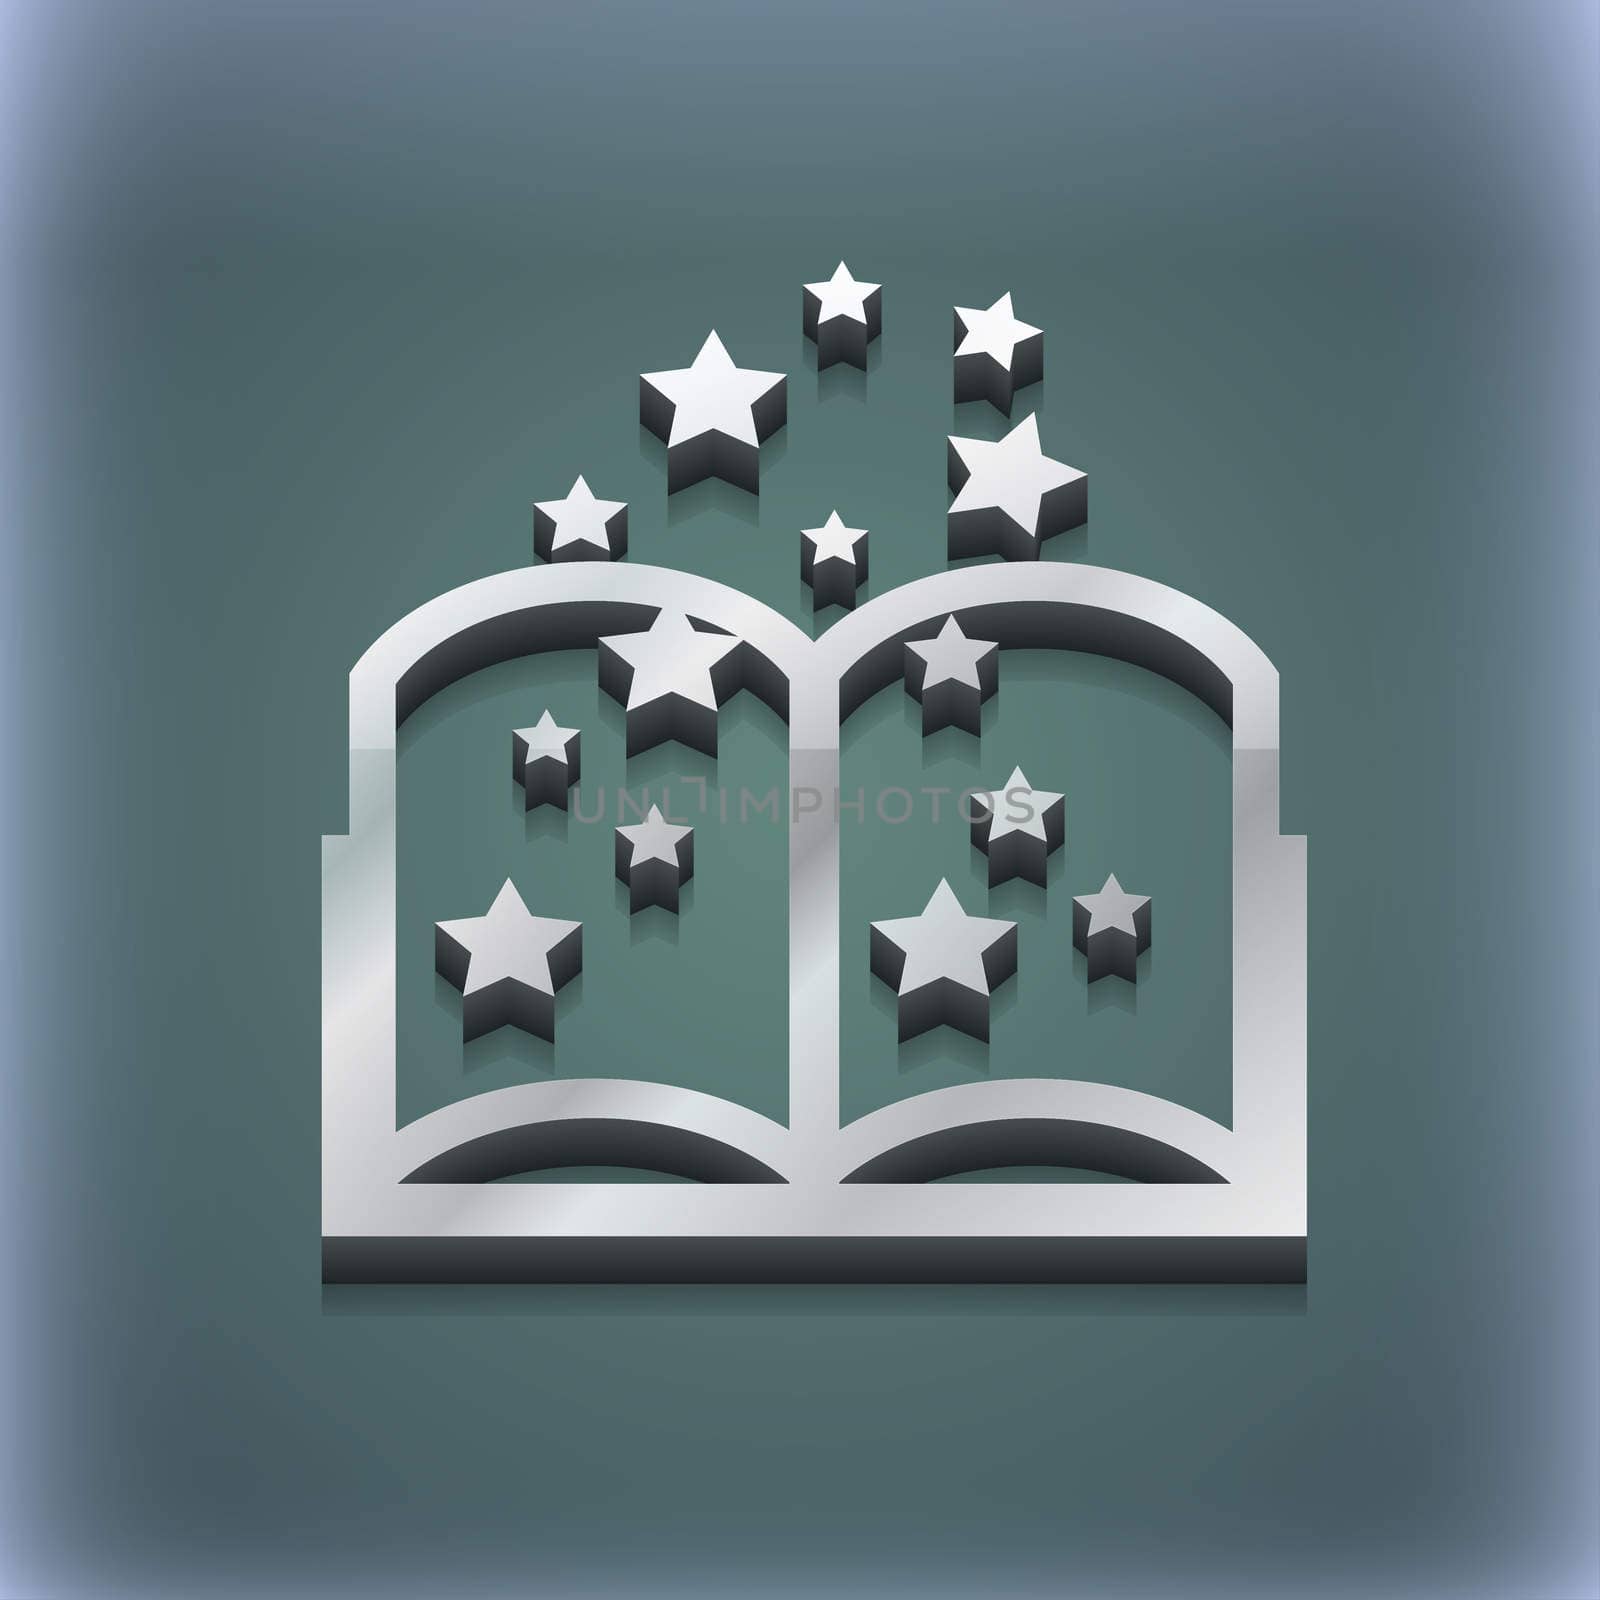 Magic Book icon symbol. 3D style. Trendy, modern design with space for your text illustration. Raster version